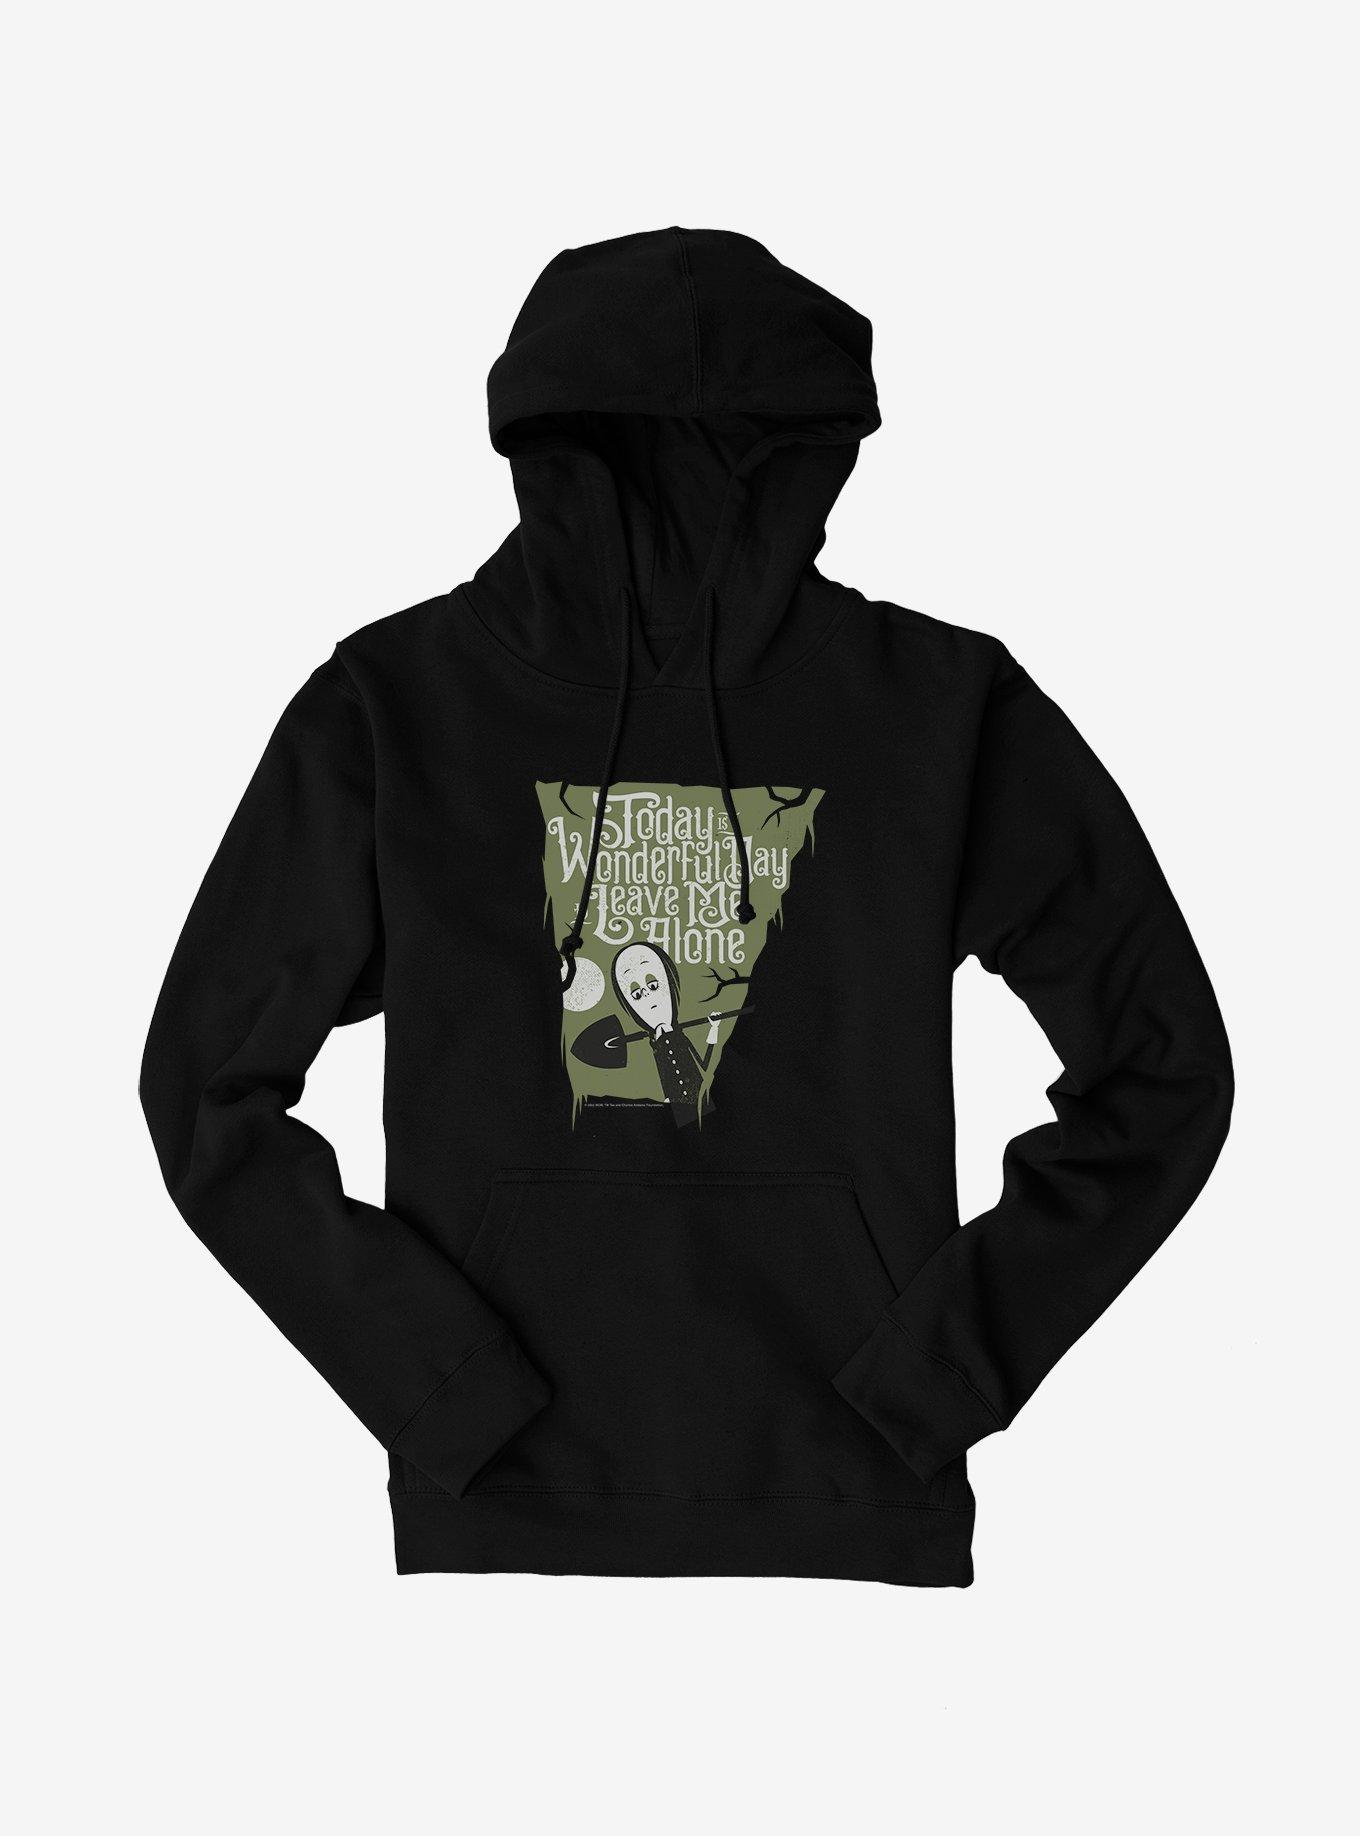 The Addams Family Leave Me Alone Hoodie